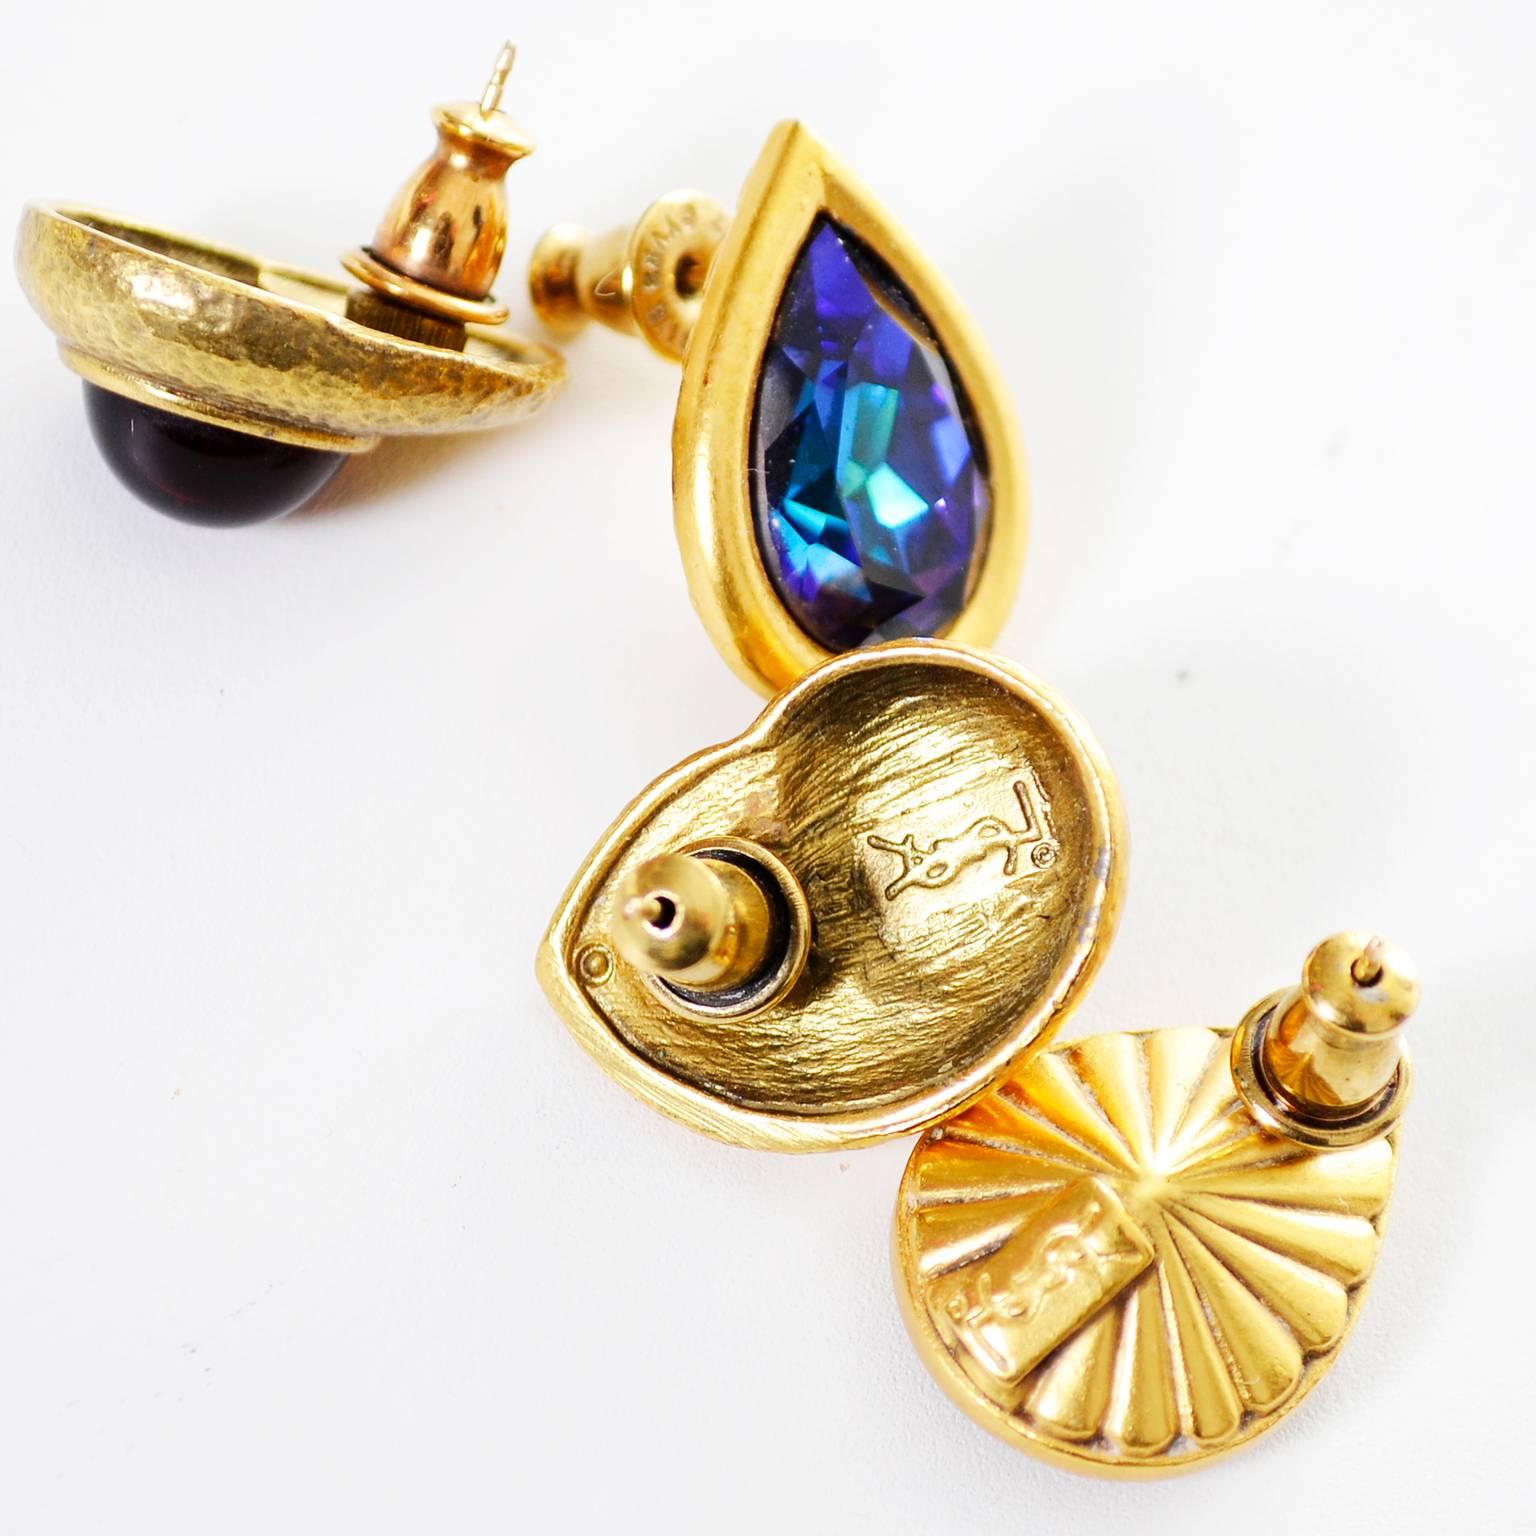 I love these YSL vintage pierced earrings! Both of these pair of earrings are 3/4 inches long and they are both signed.  The first pair is a made of a gold textured metal with deep red stones and the other is a teardrop shaped pair with blue faceted